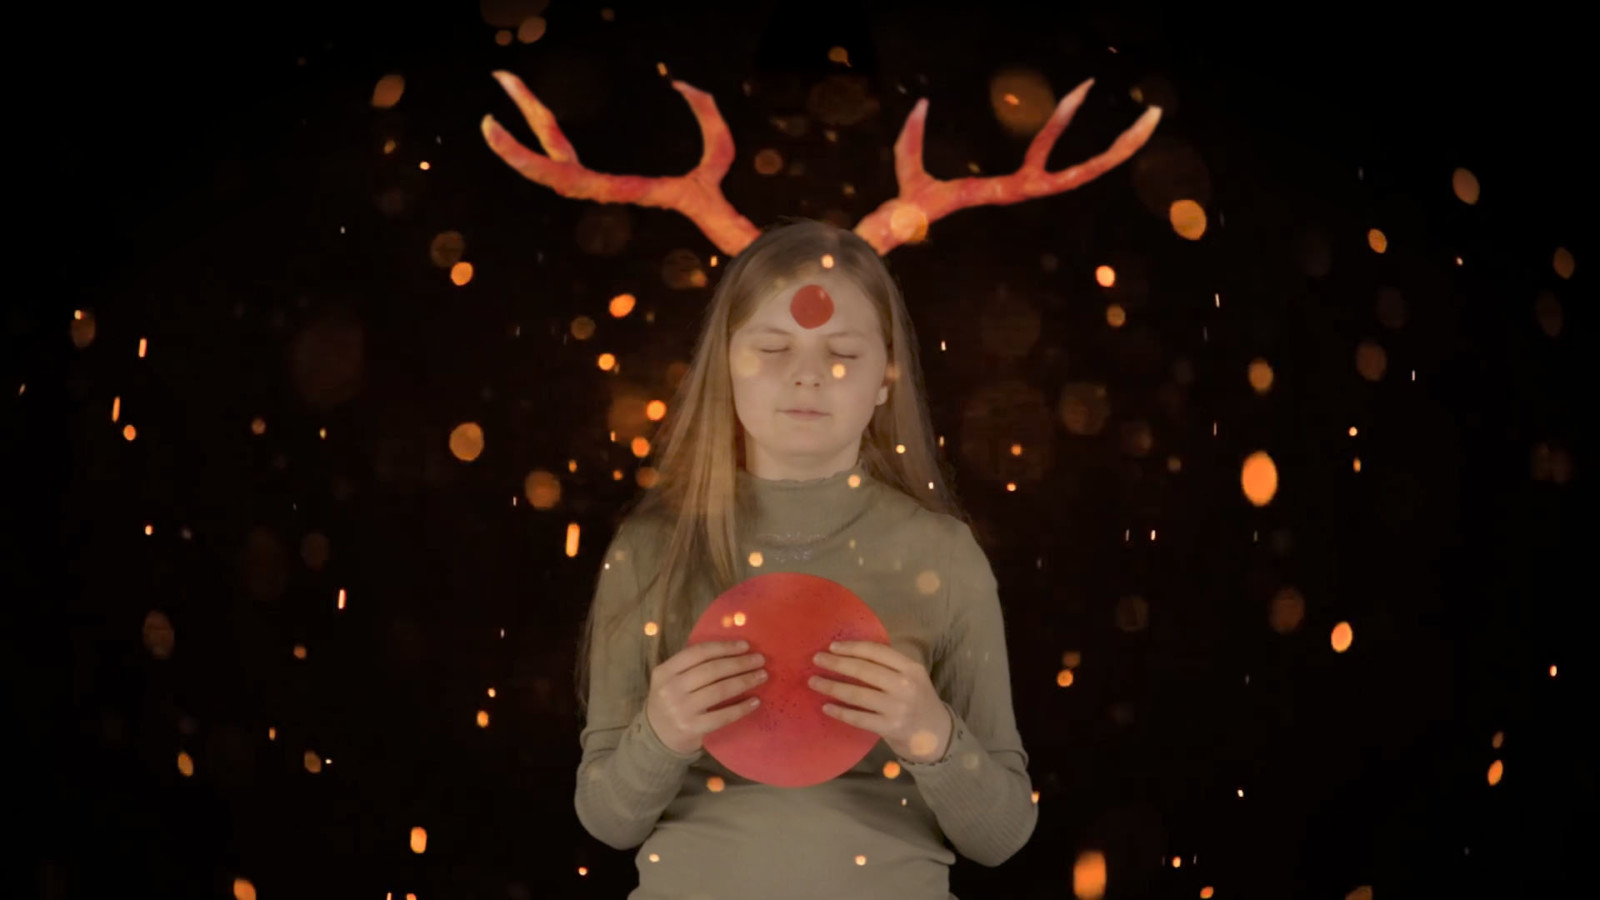 A girl wearing hand made antlers with a red circle on her head and in her hands, surrounded by orange glowing speckles.